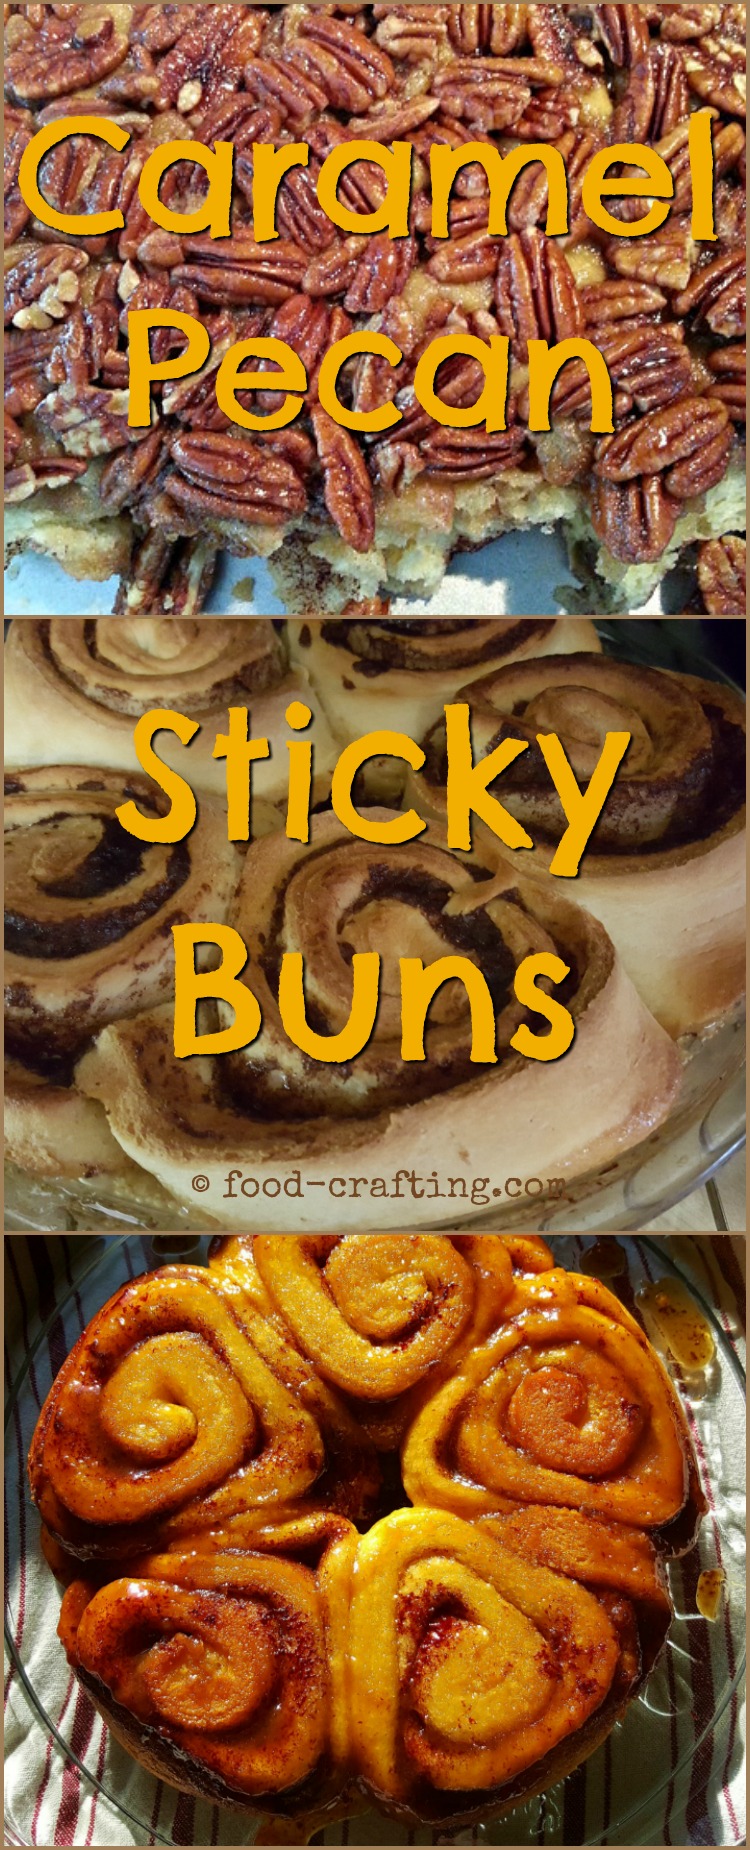 Caramel pecan sticky buns and rolls - proofing, with pecan and without nuts